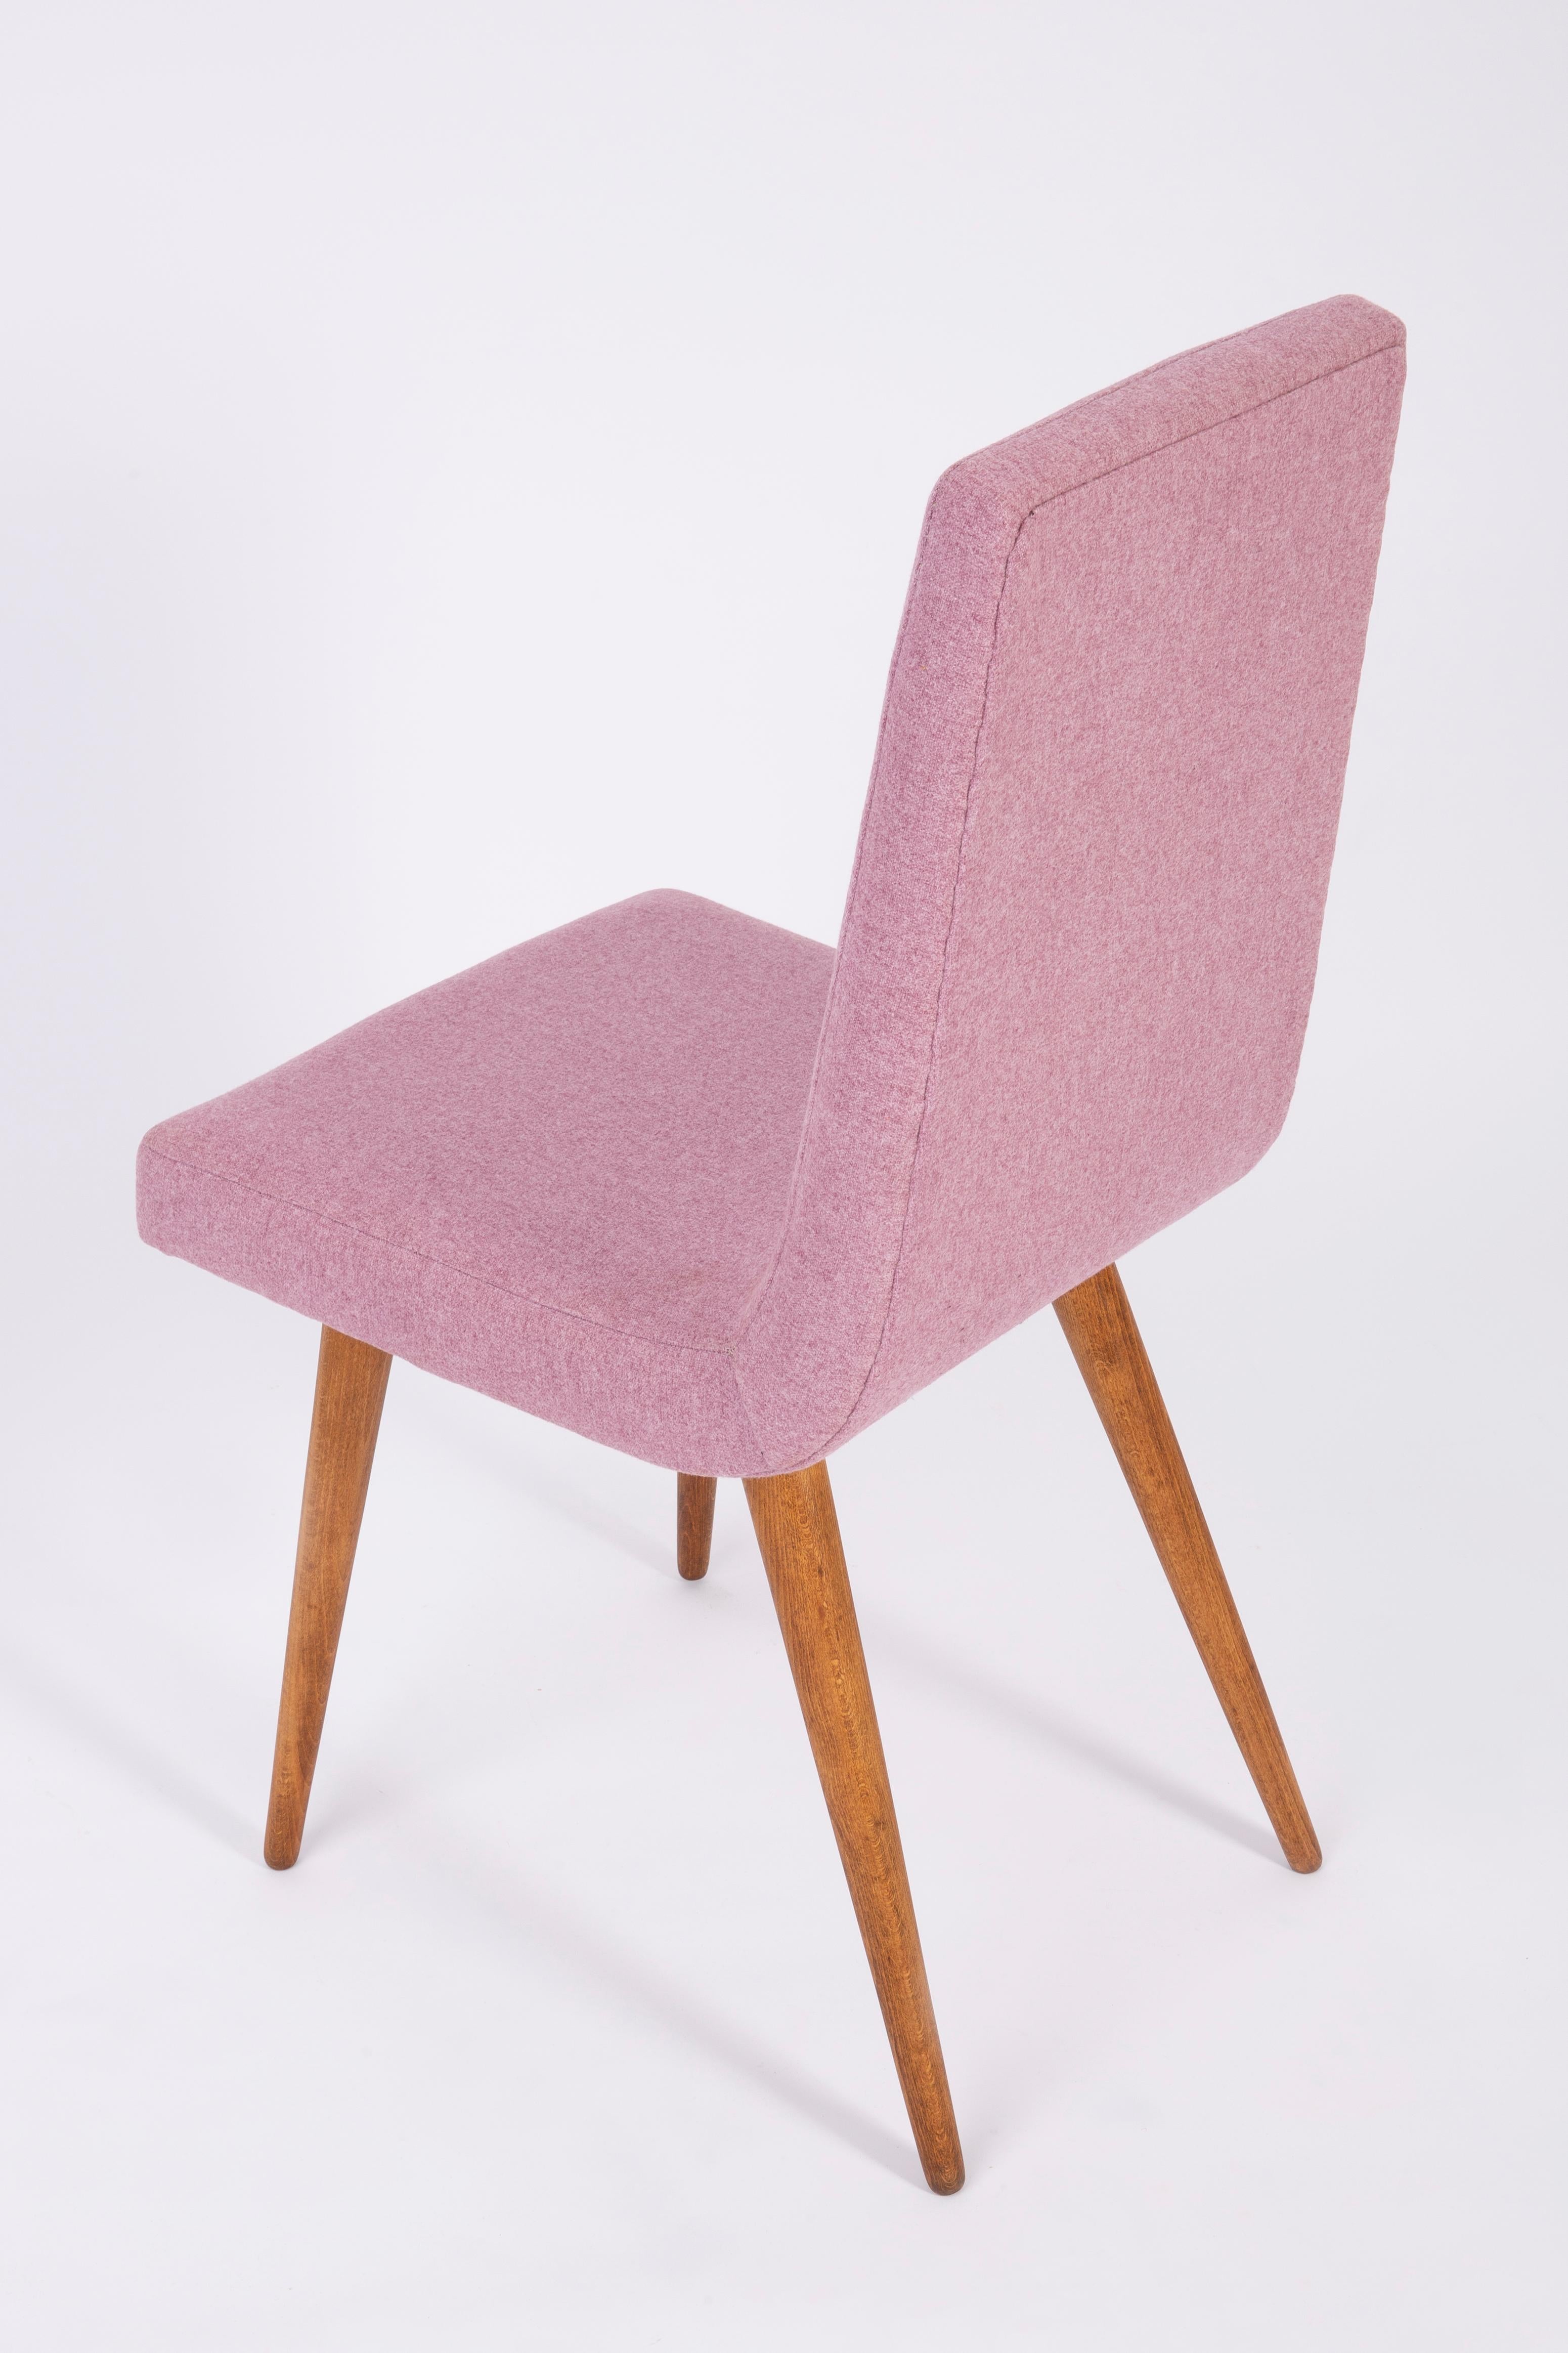 Chair designed by Prof. Rajmund Halas. Have been made of beechwood. The chair is after complete upholstery renovation, the woodwork has been cleaned and refreshed. We used matte varnish. Seat and back was dressed in a pink mélange (color 2807),